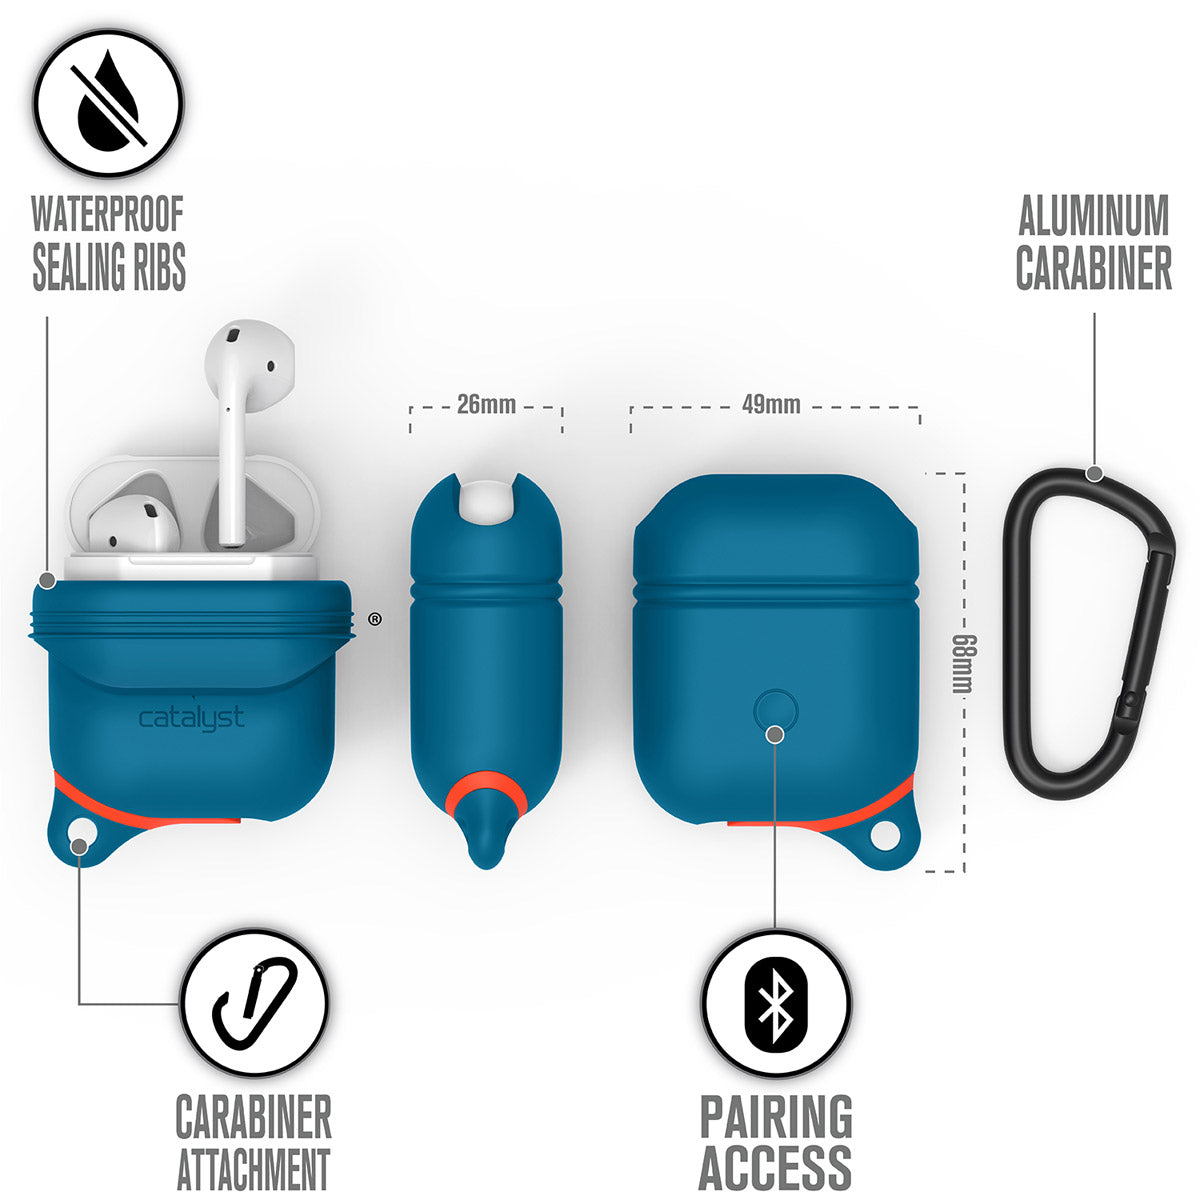 CATAPDTBFC-FBA | Catalyst airpods gen2/1 waterproof case + carabiner showing the case dimension and features in blueridge sunset text reads waterproof sealing ribs aluminum carabiner pairing access carabiner attachment